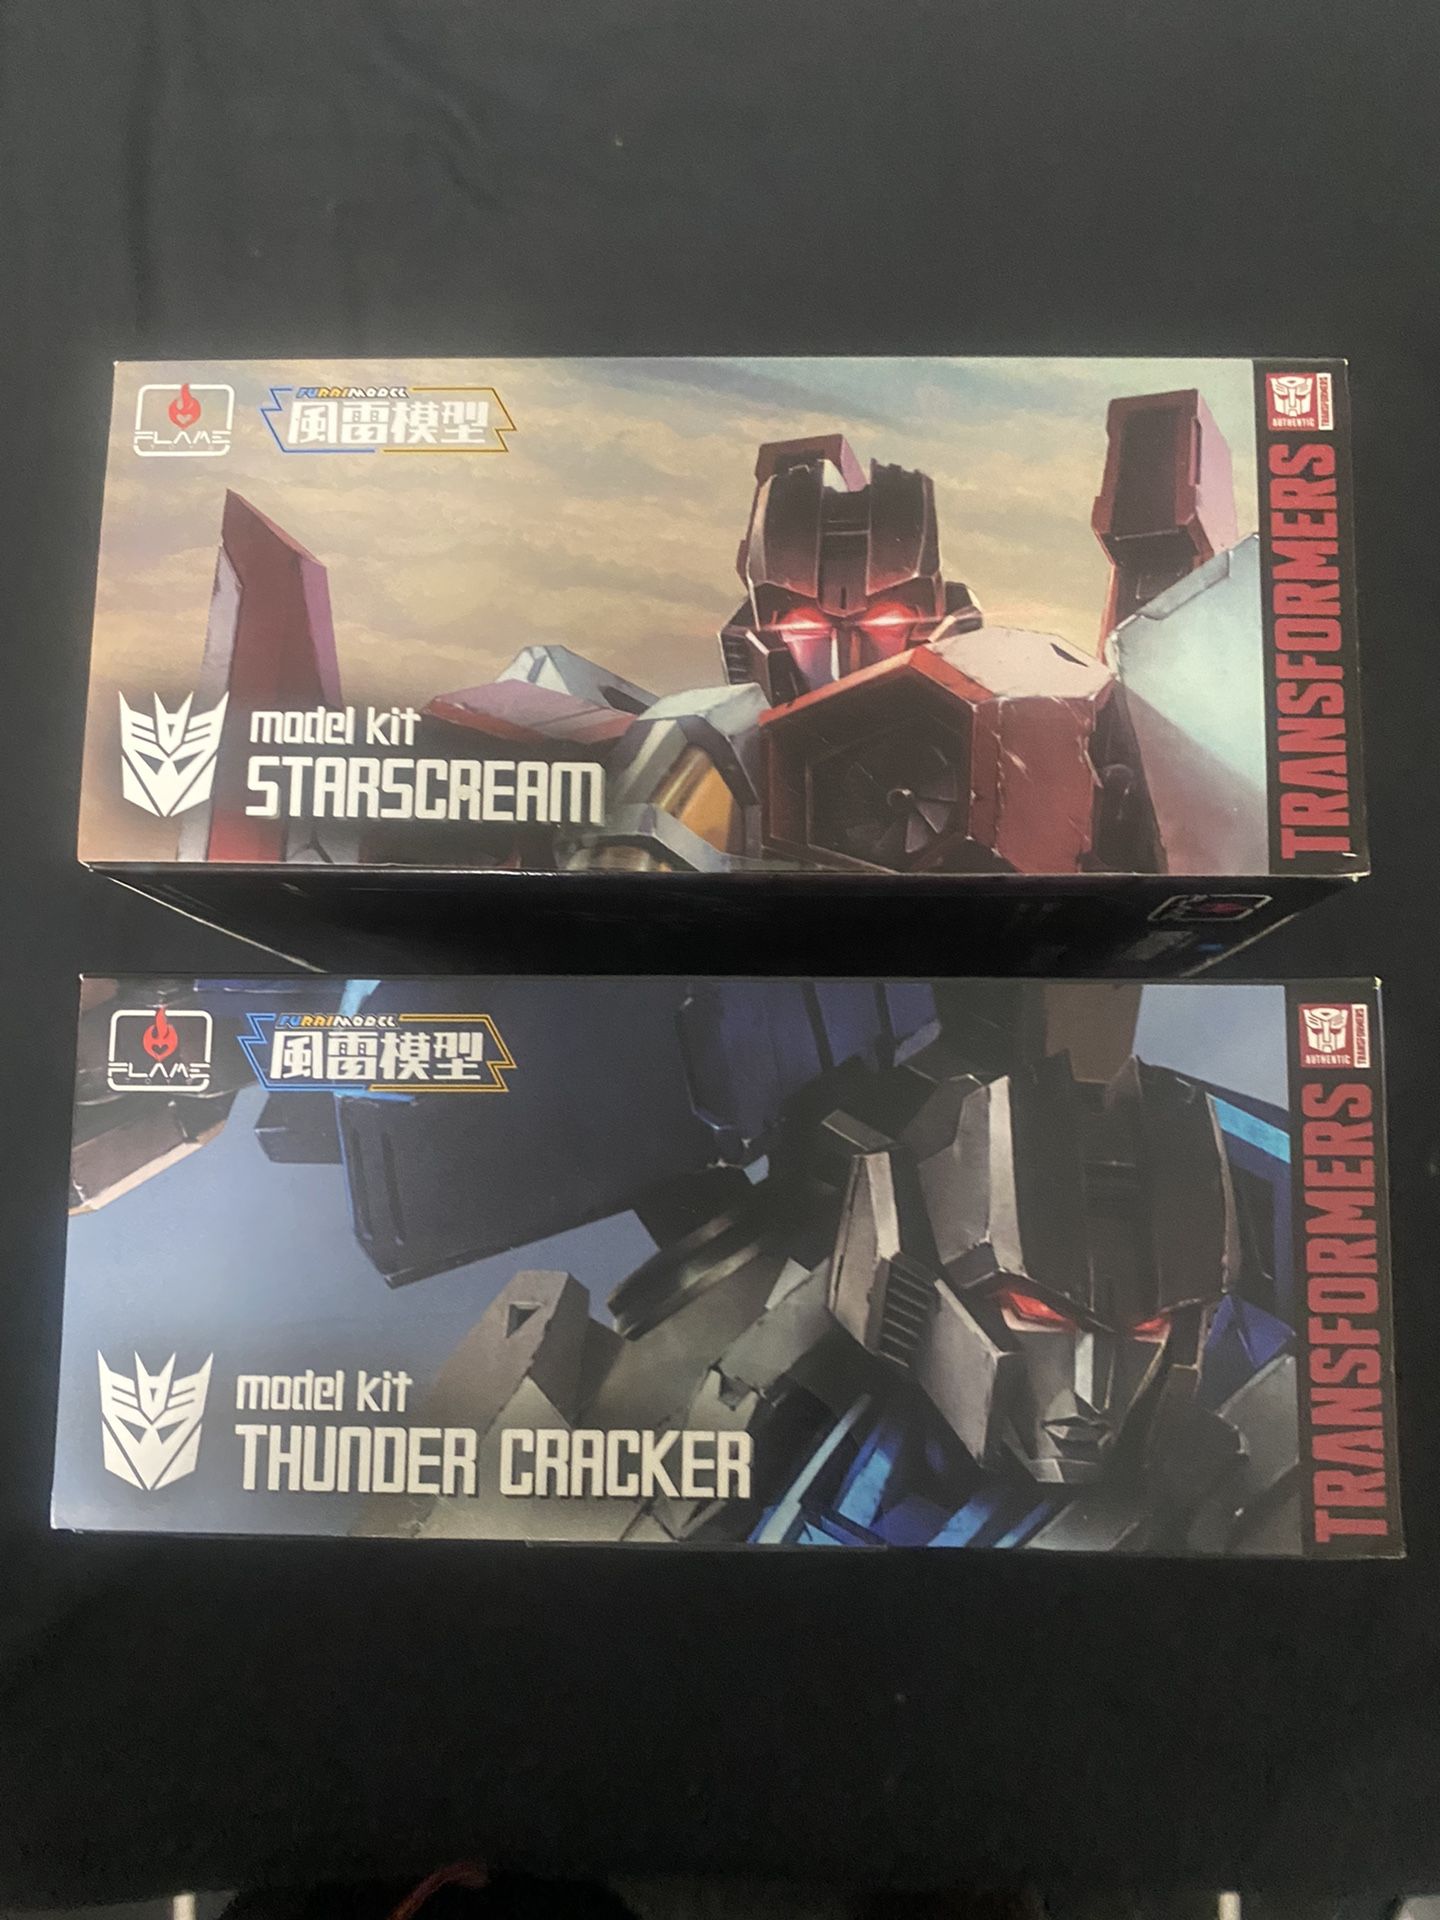 Flame Toys Transformers Starscream and Thunder Cracker Bundle Factory Sealed Boxes